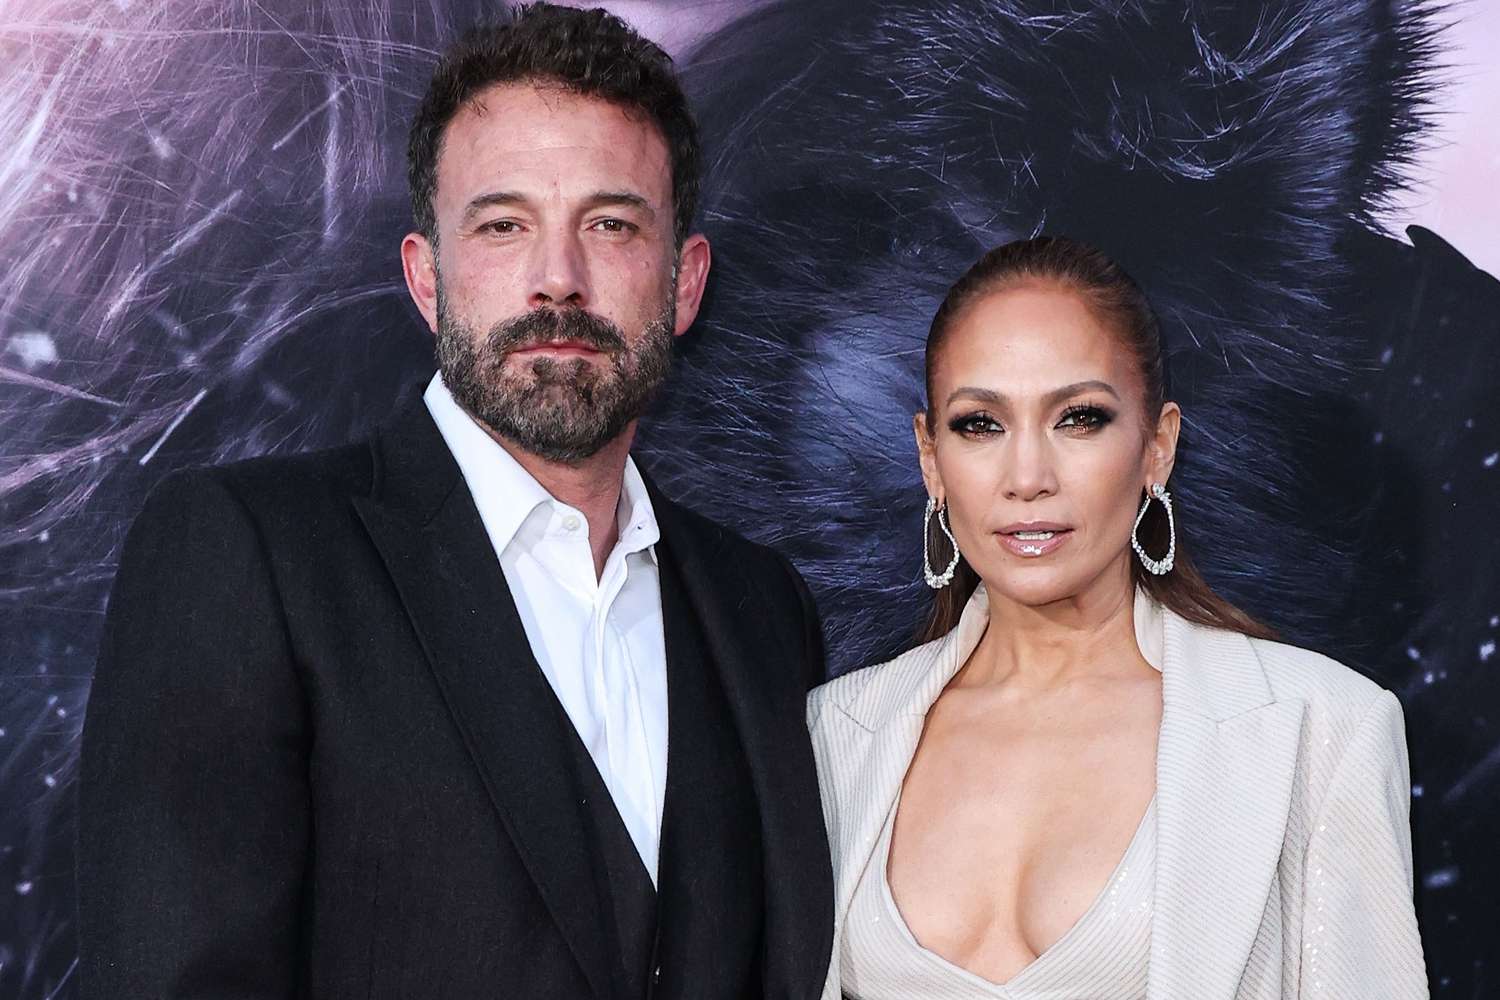 Jennifer Lopez Posts Father's Day Tribute to Ben Affleck amid Marital Strain: 'Our Hero'